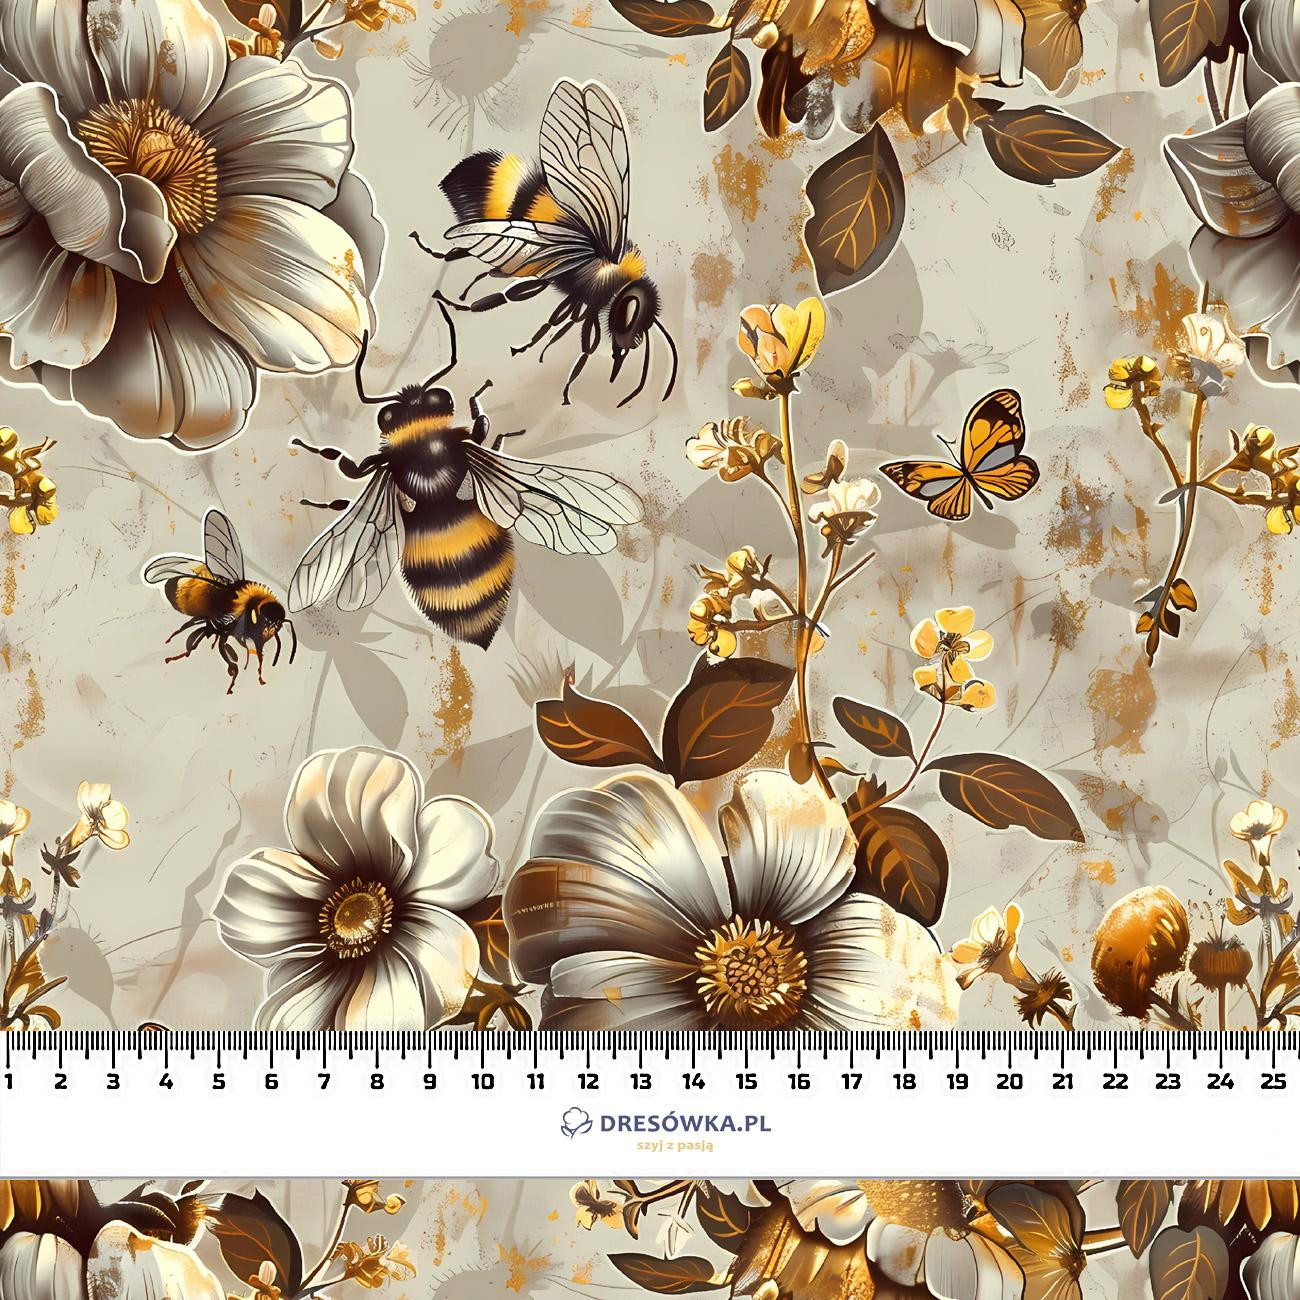 BEES & FLOWERS - looped knit fabric